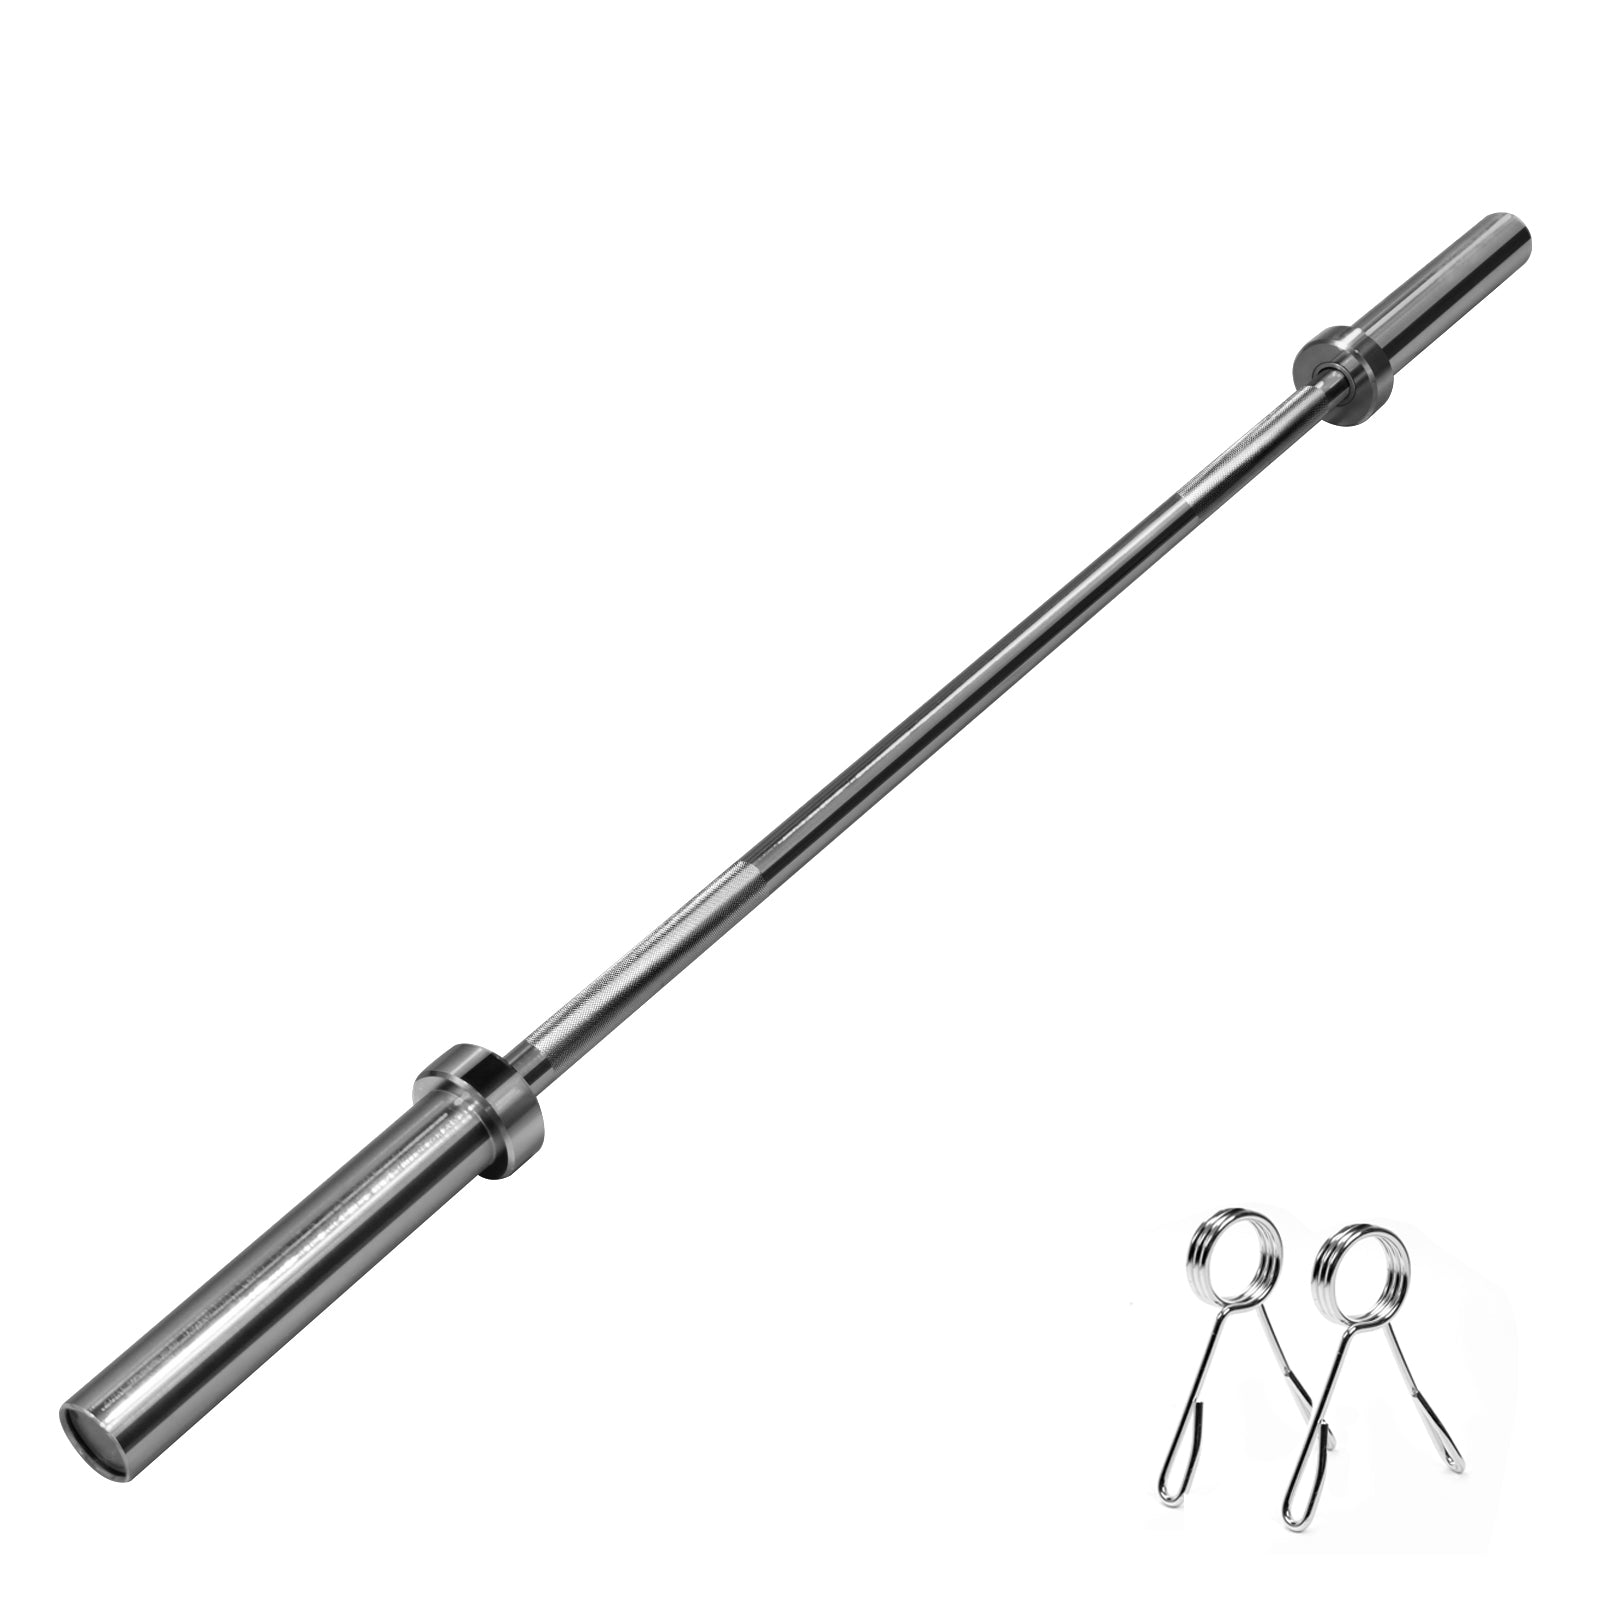 5 FT OLYMPIC WEIGHTLIFTING BARBELL with SPRING COLLARS รูปภาพเด่น